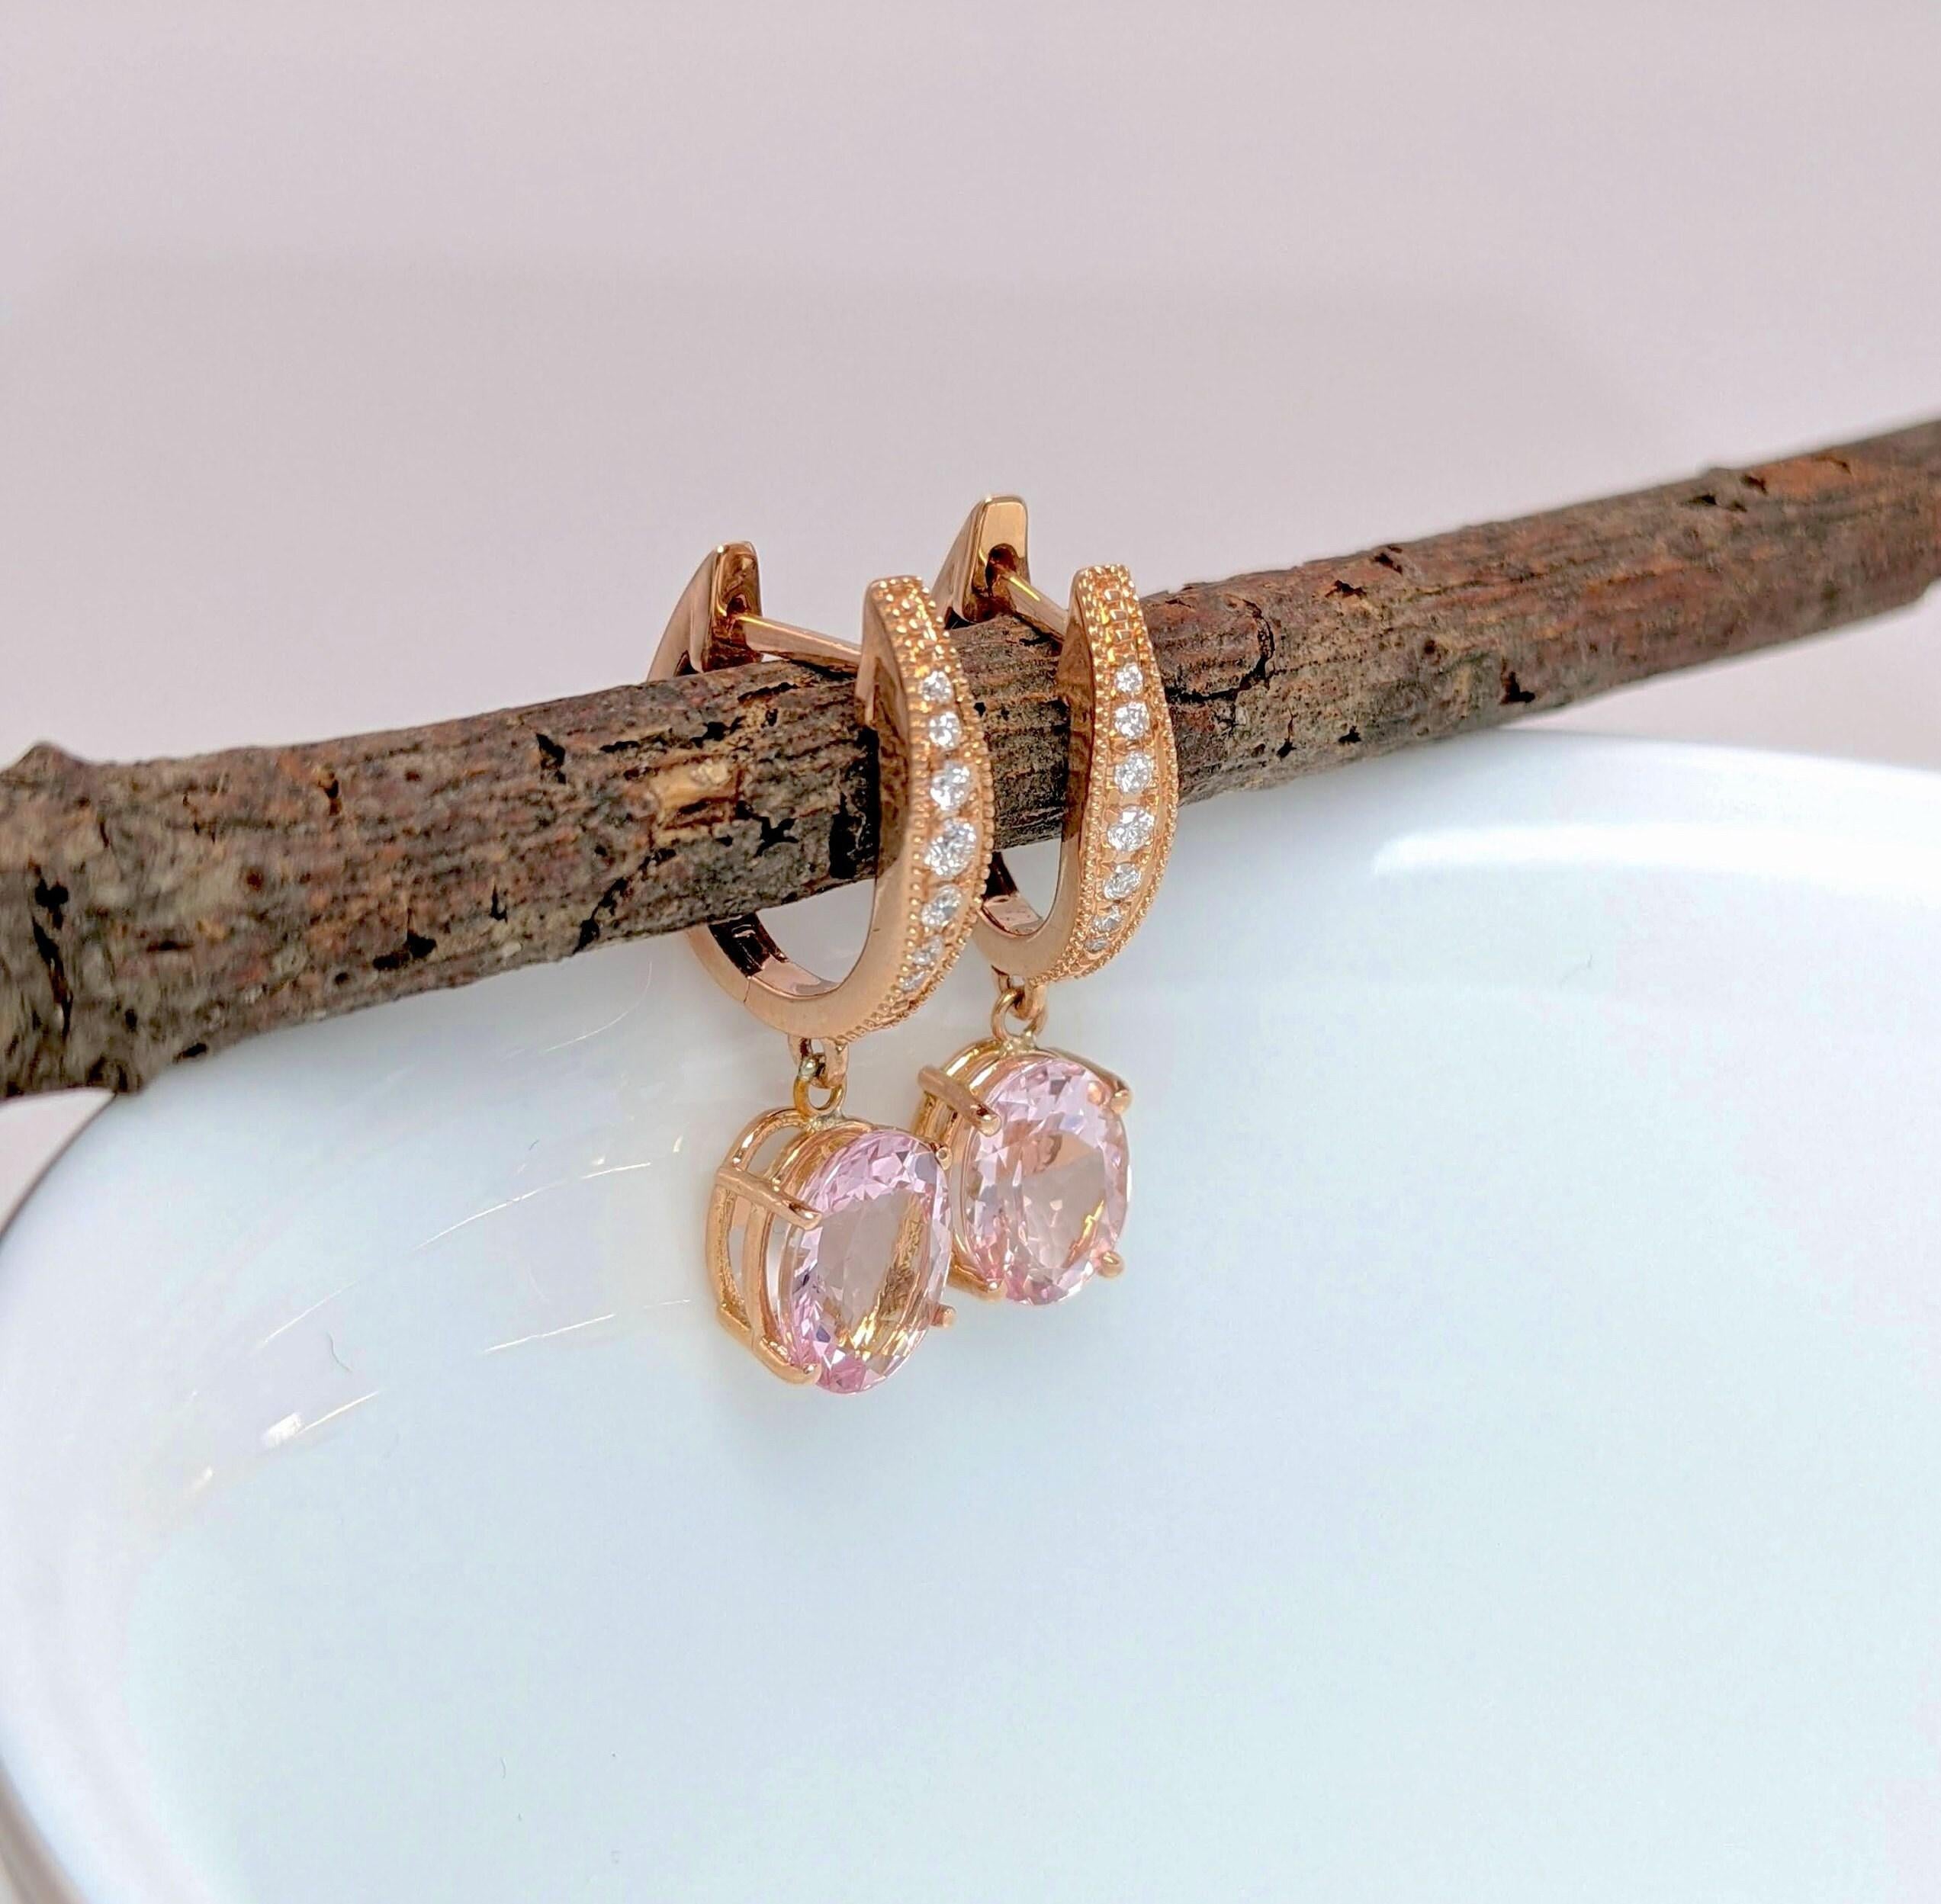 These stunning morganite earrings are the perfect addition to any jewelry collection! Pairing morganite and rose gold is an unbeatable combination, especially if you are looking for something more feminine :)

Specifications:

Item Type: Dangle